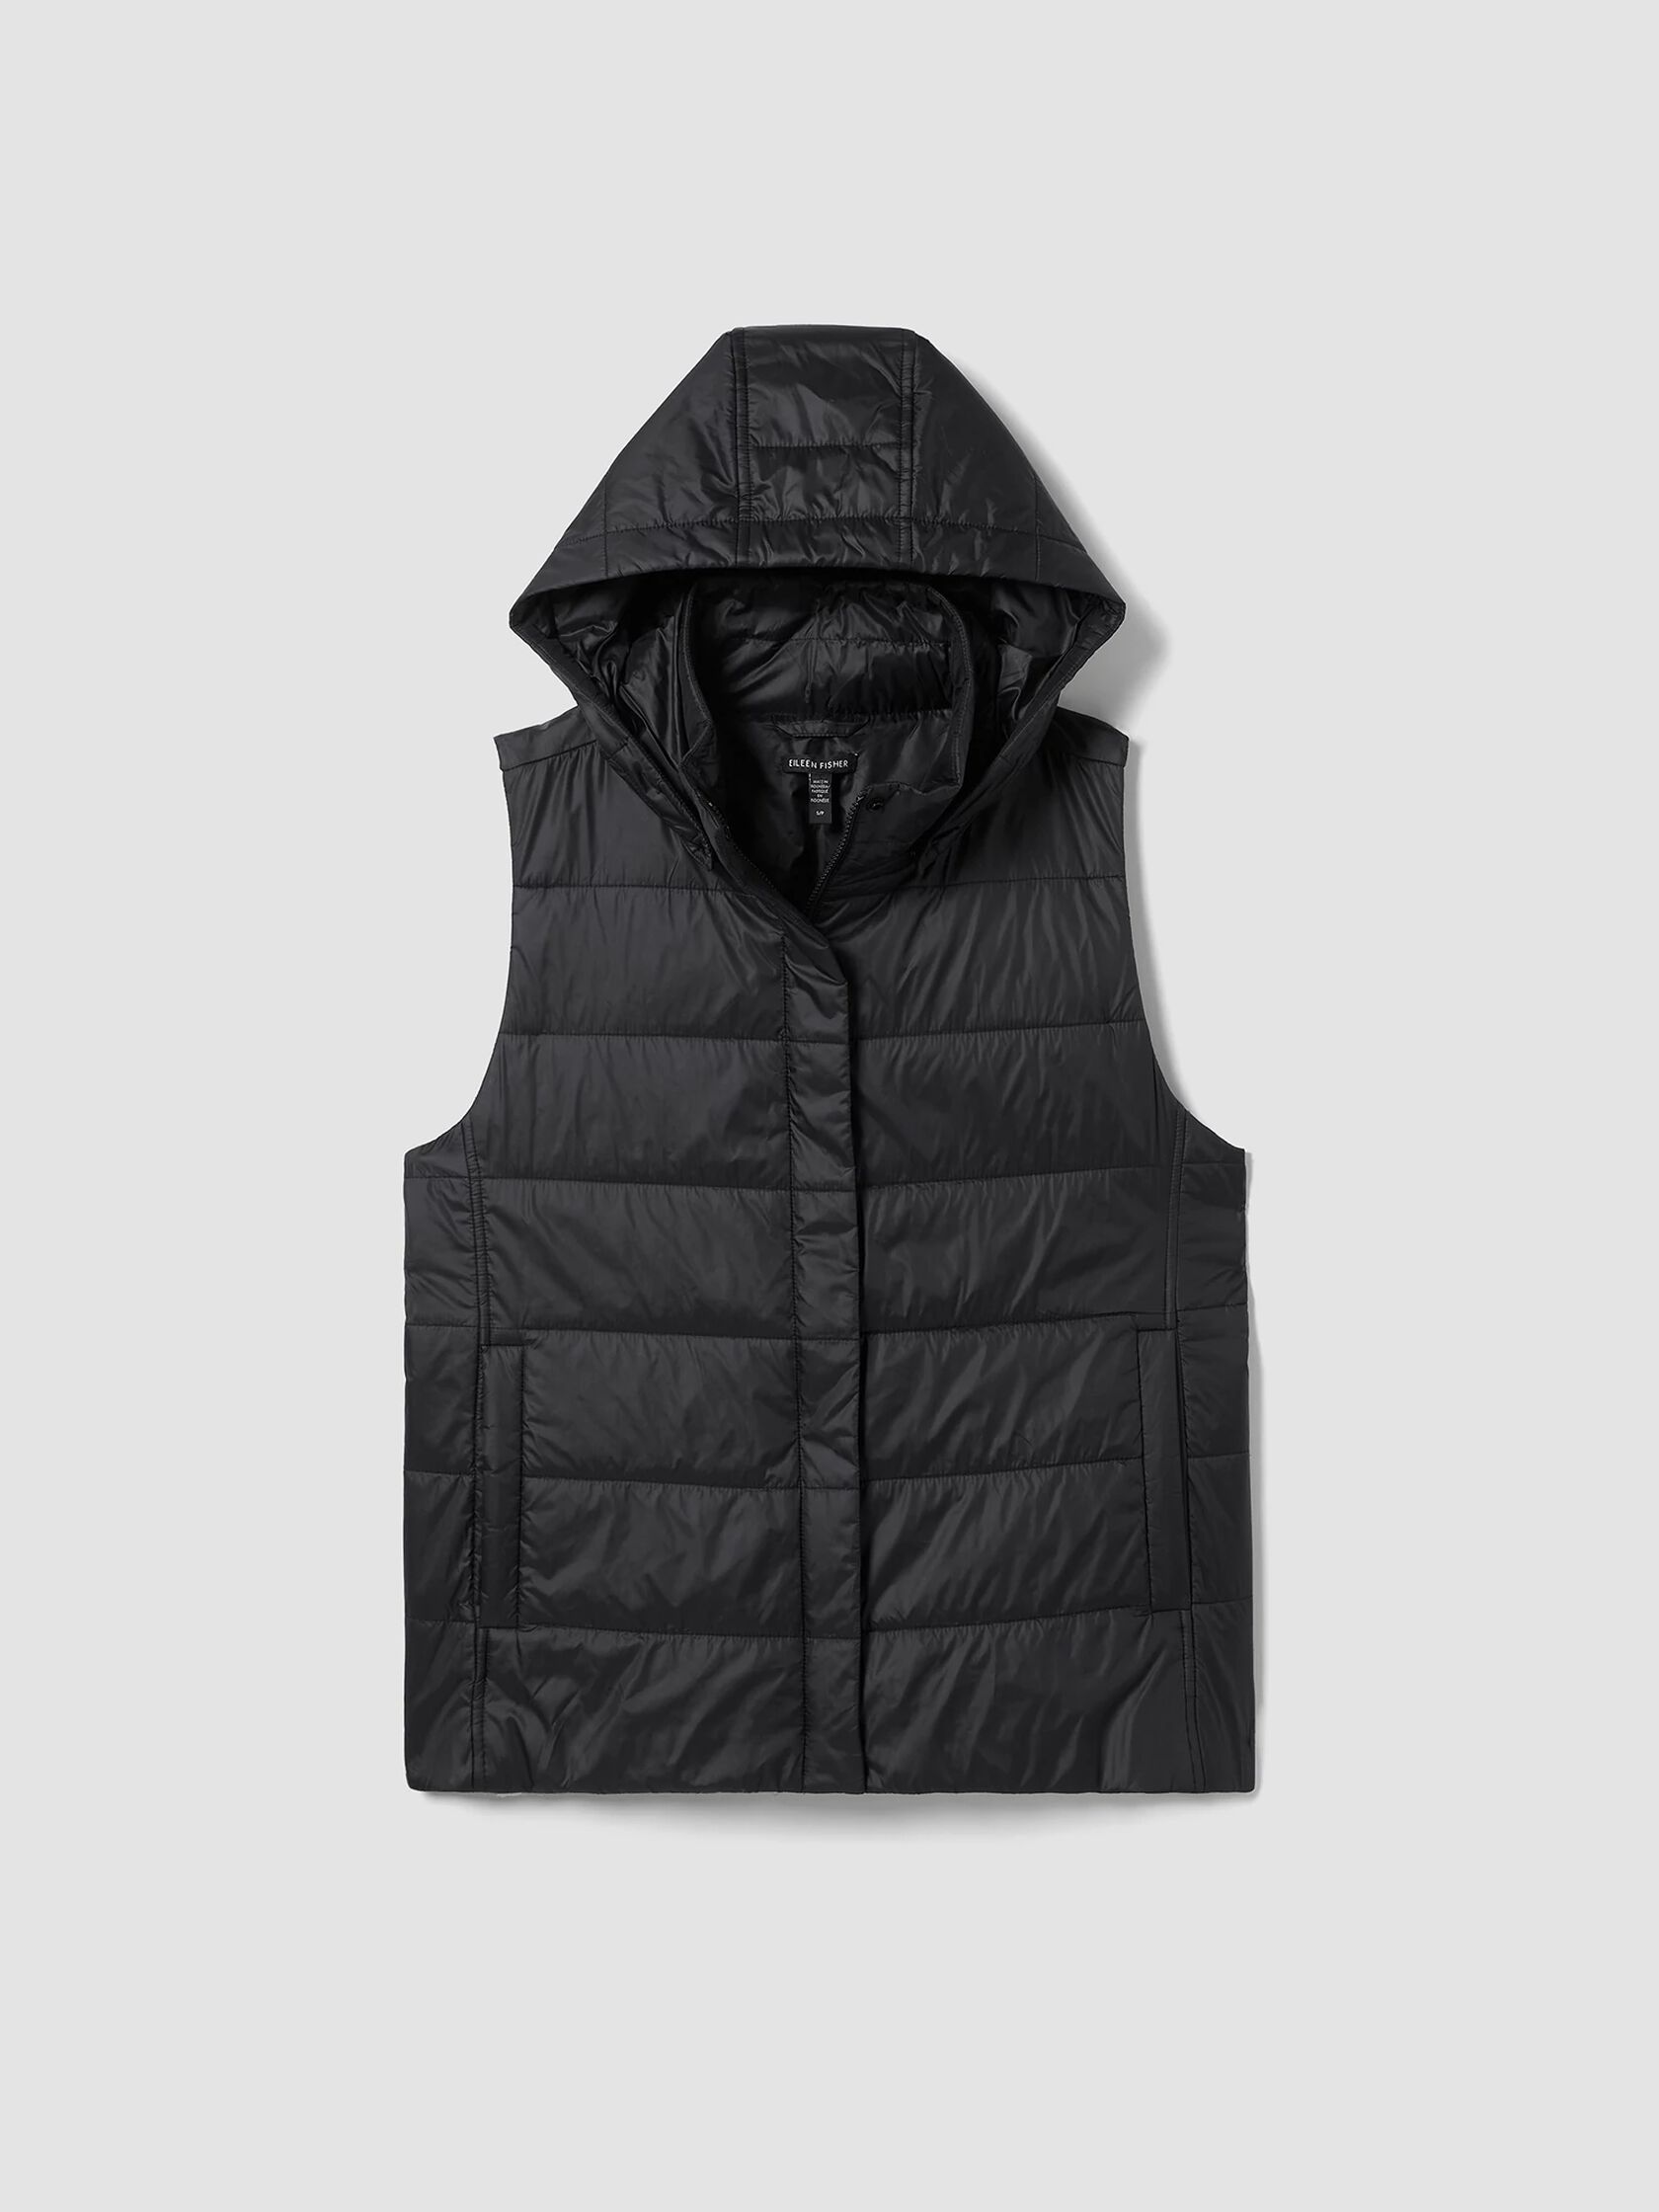 Eggshell Recycled Nylon Vest with Removable Hood | EILEEN FISHER